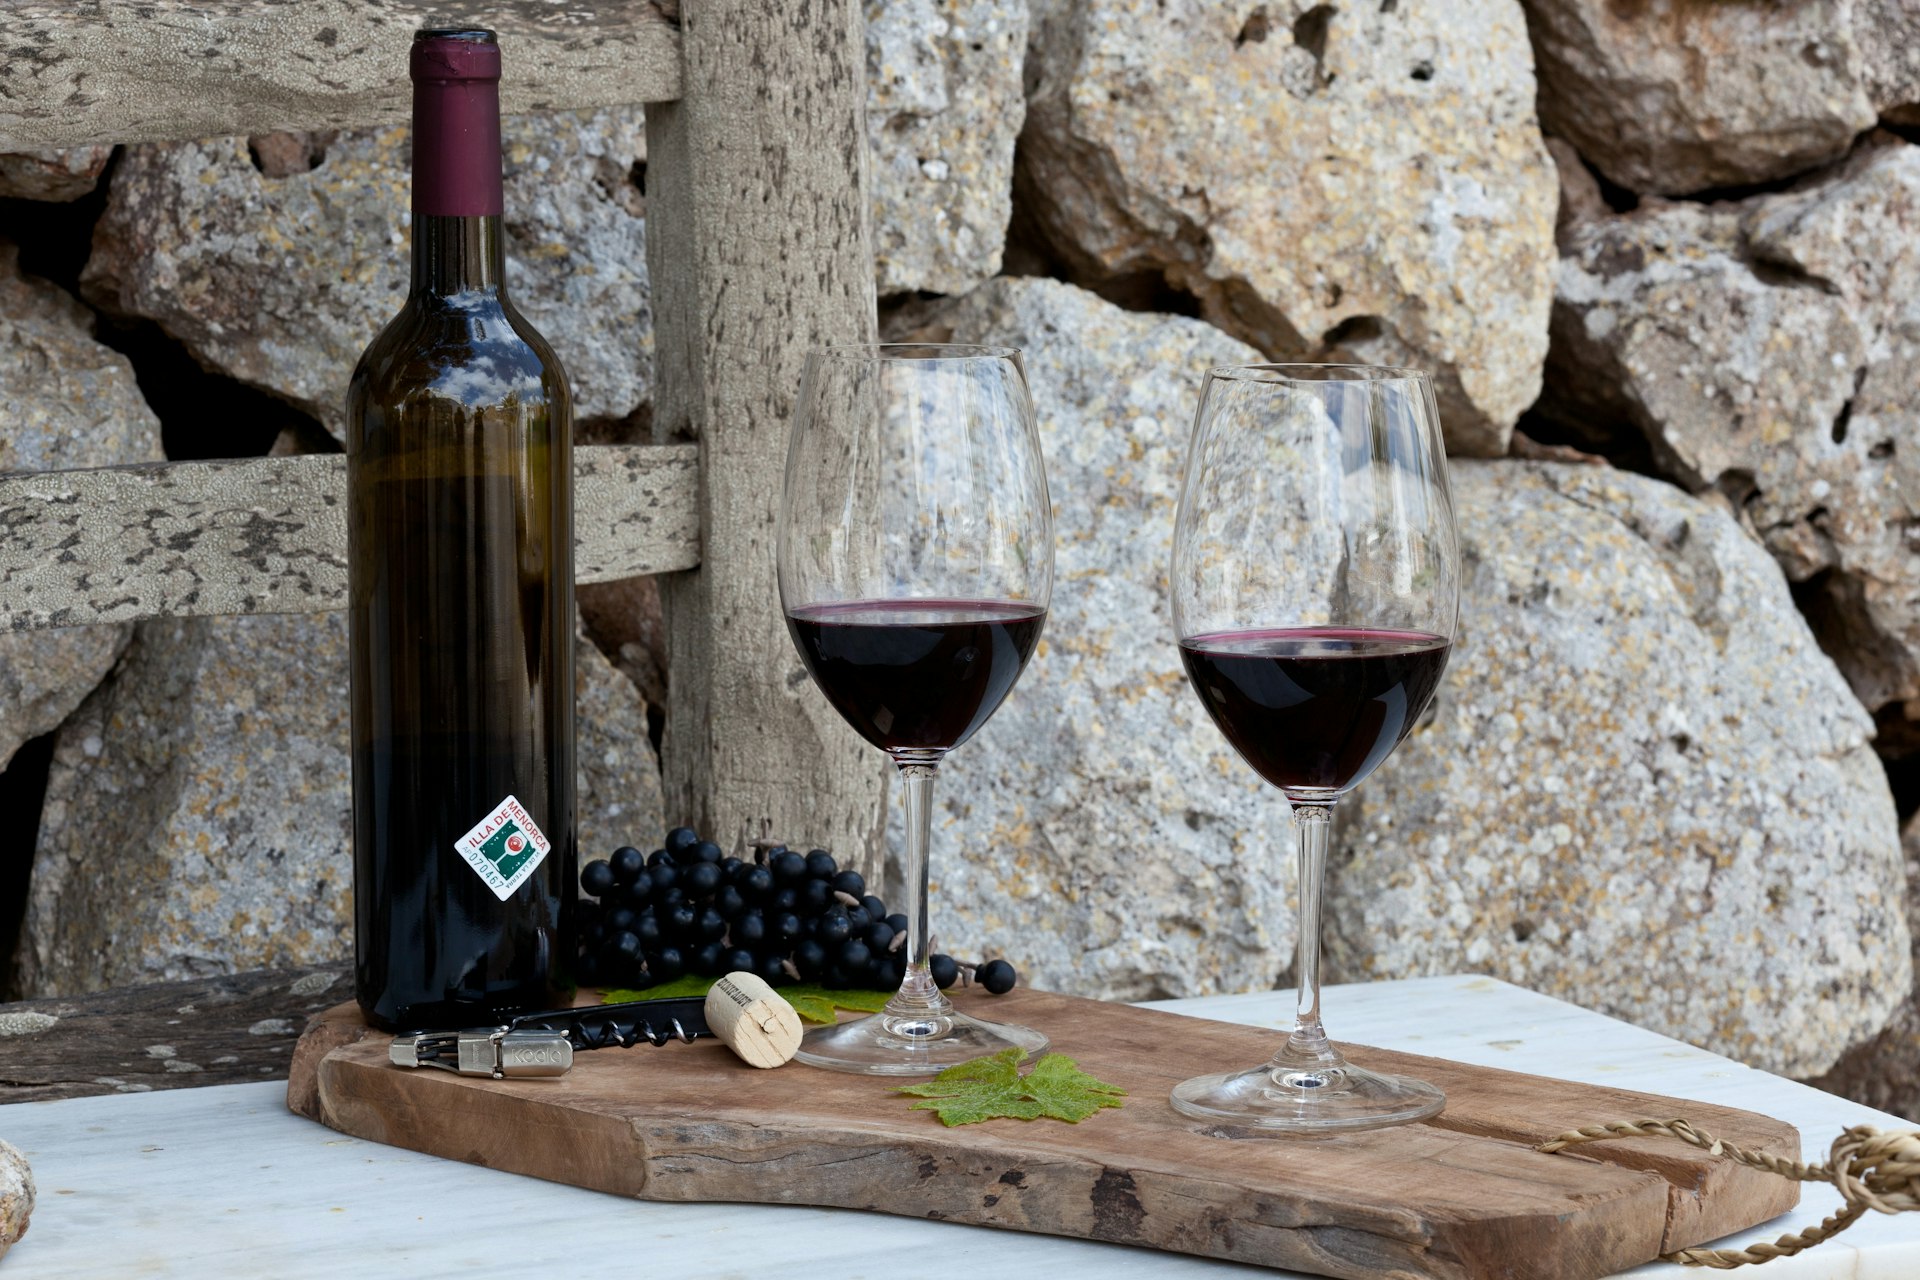 Two glasses of red wine stand next to a wine bottle on a wooden board